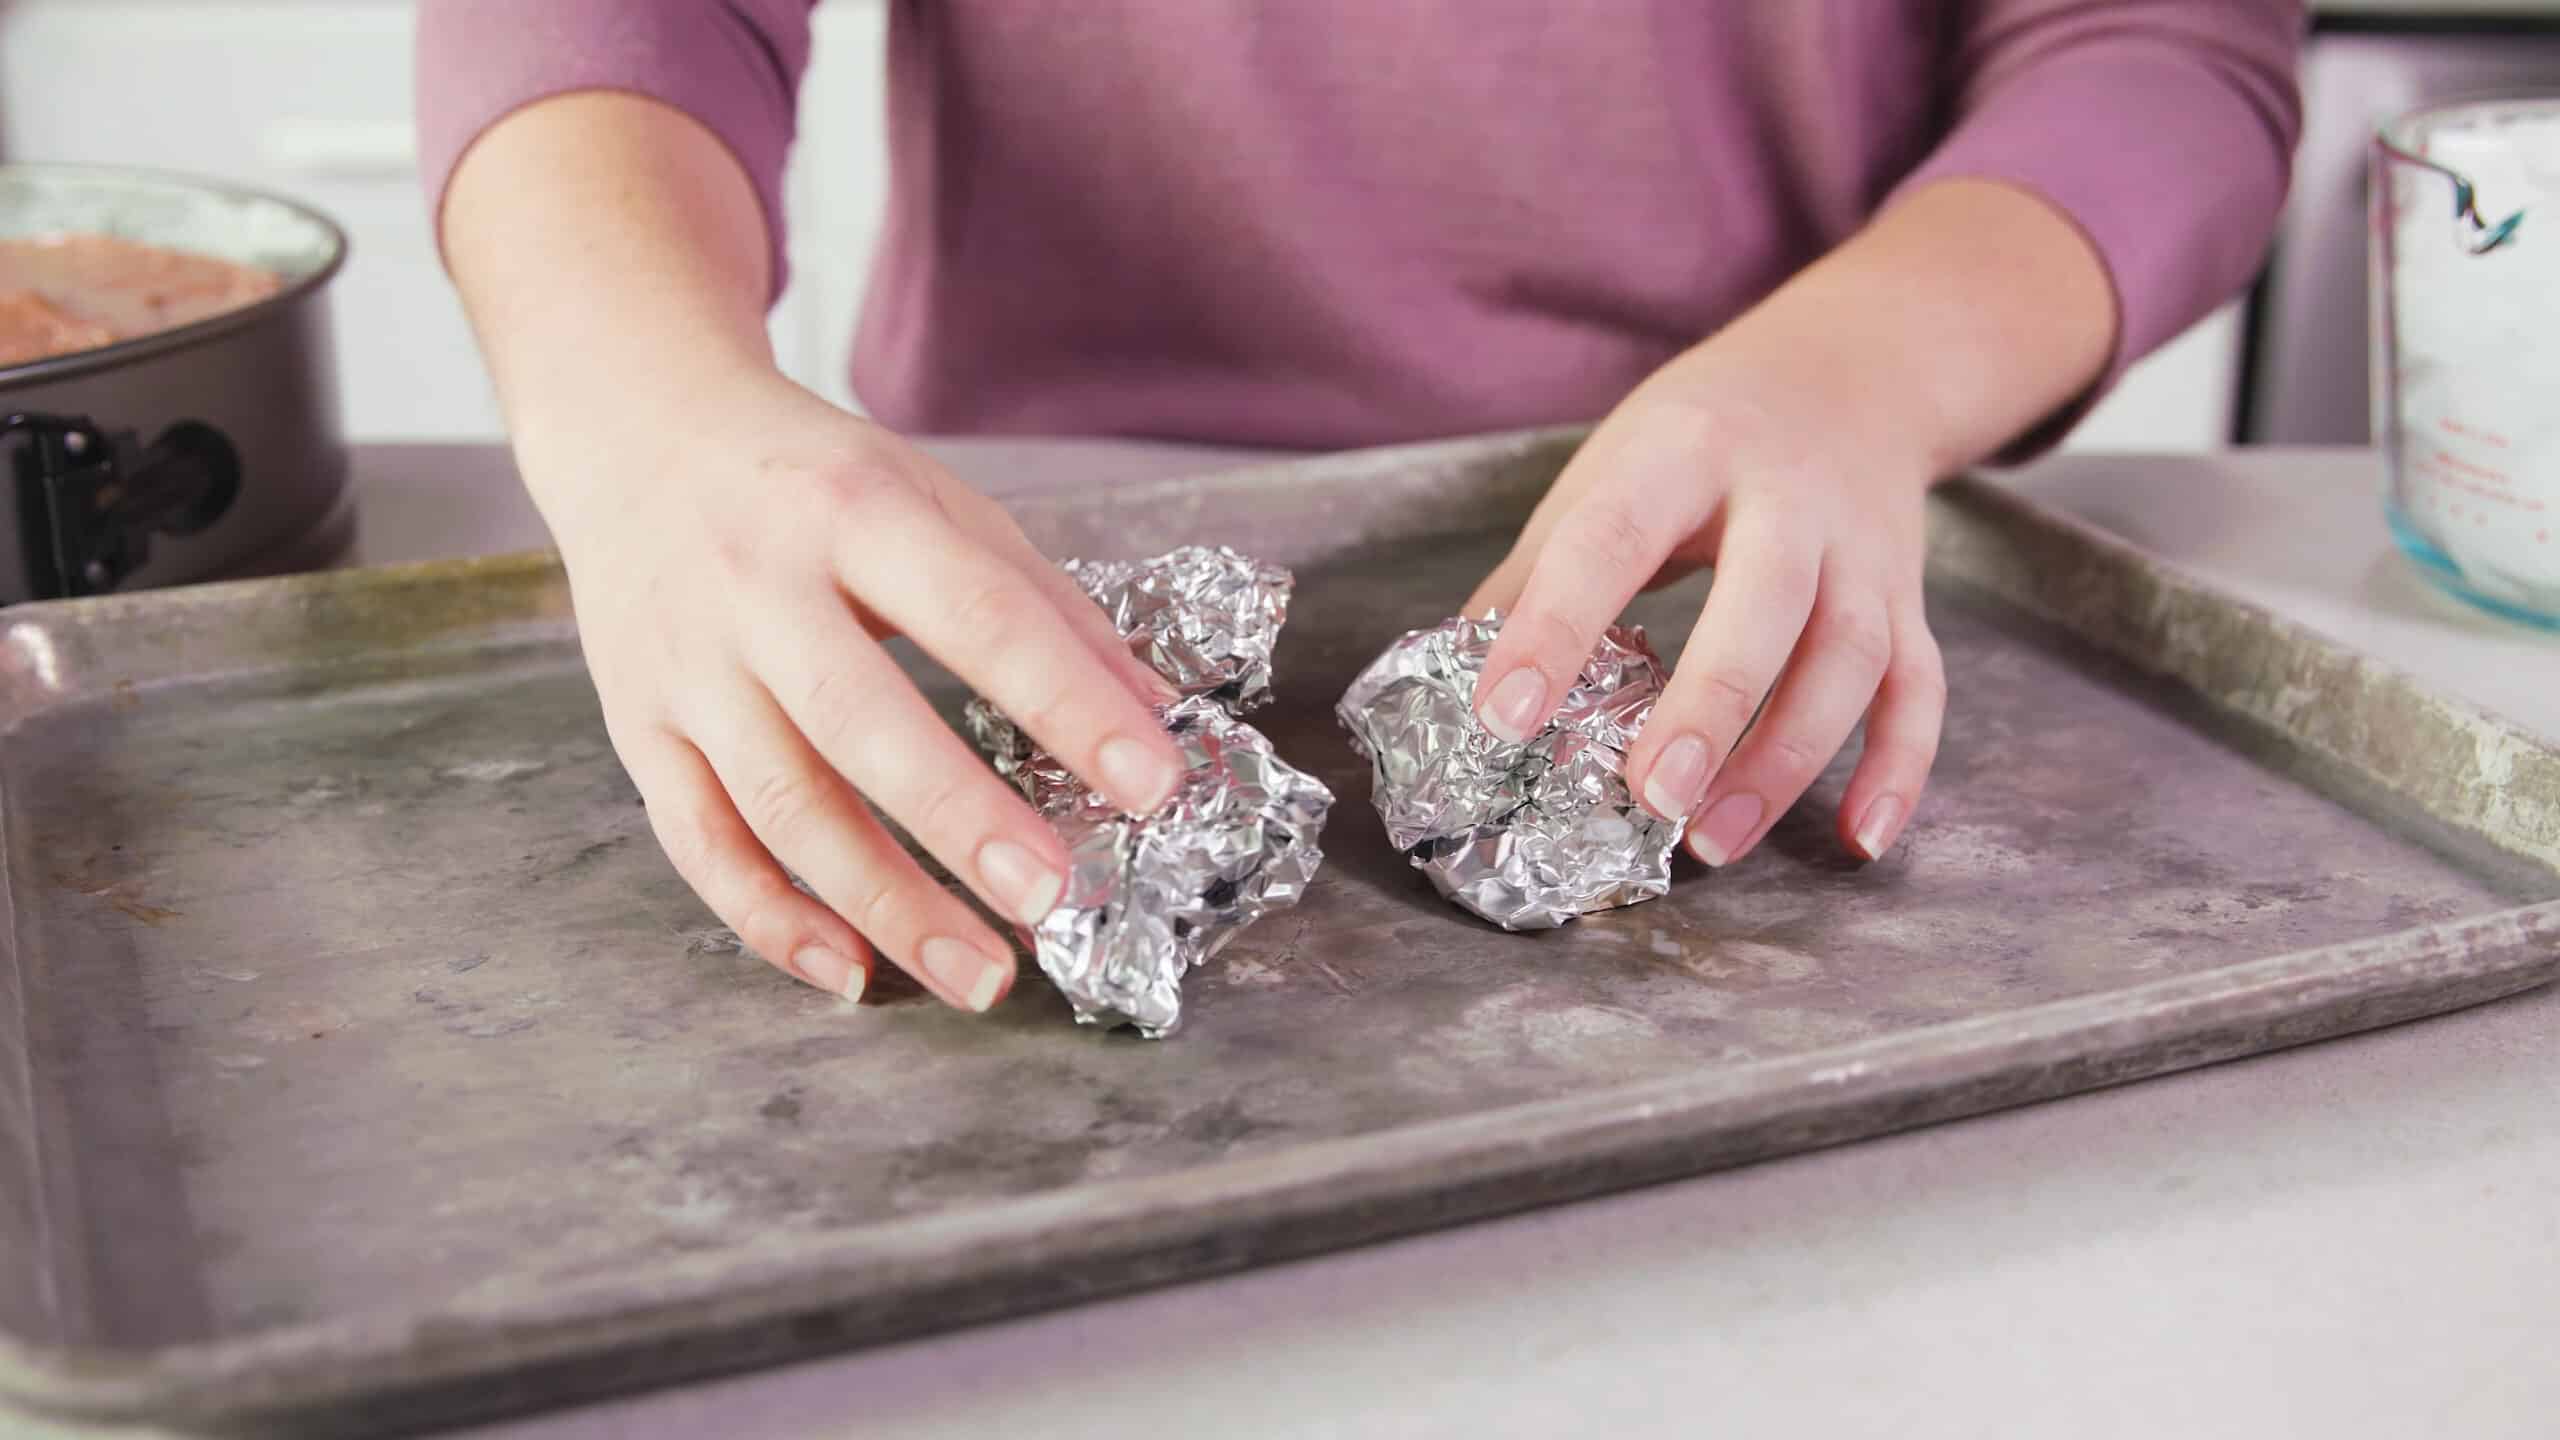 Angled view of a metal baking sheet with three balls of aluminum foil that will form a triangular stand for the spring form pan to rest on.